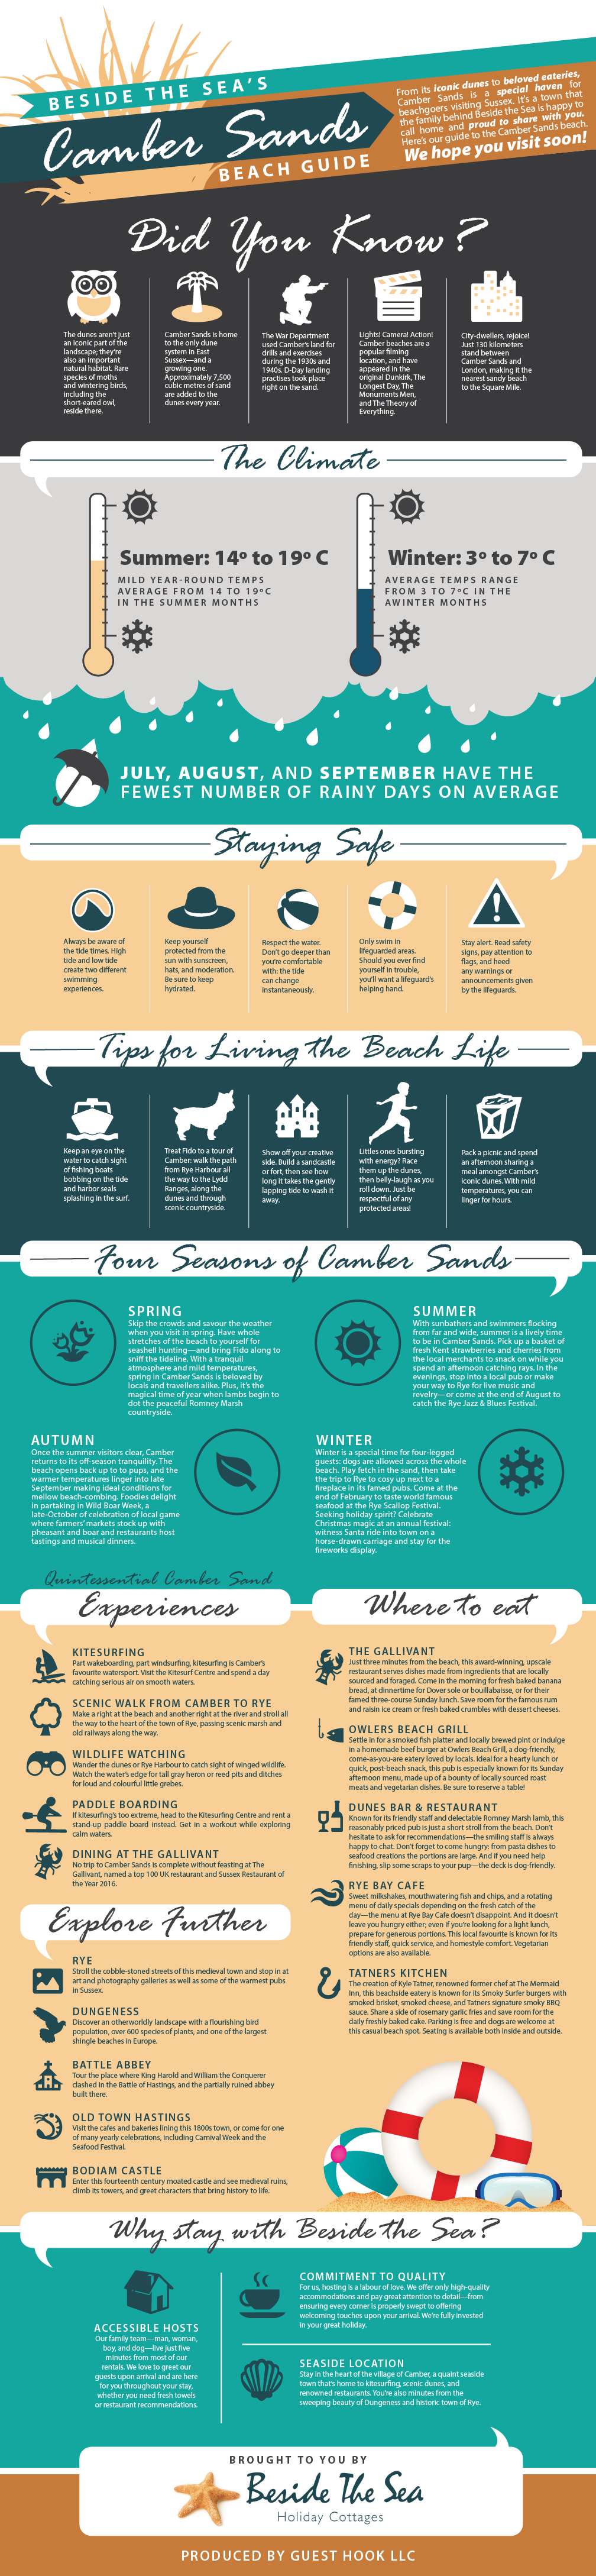 Camber Sands Beach Guide Infographic